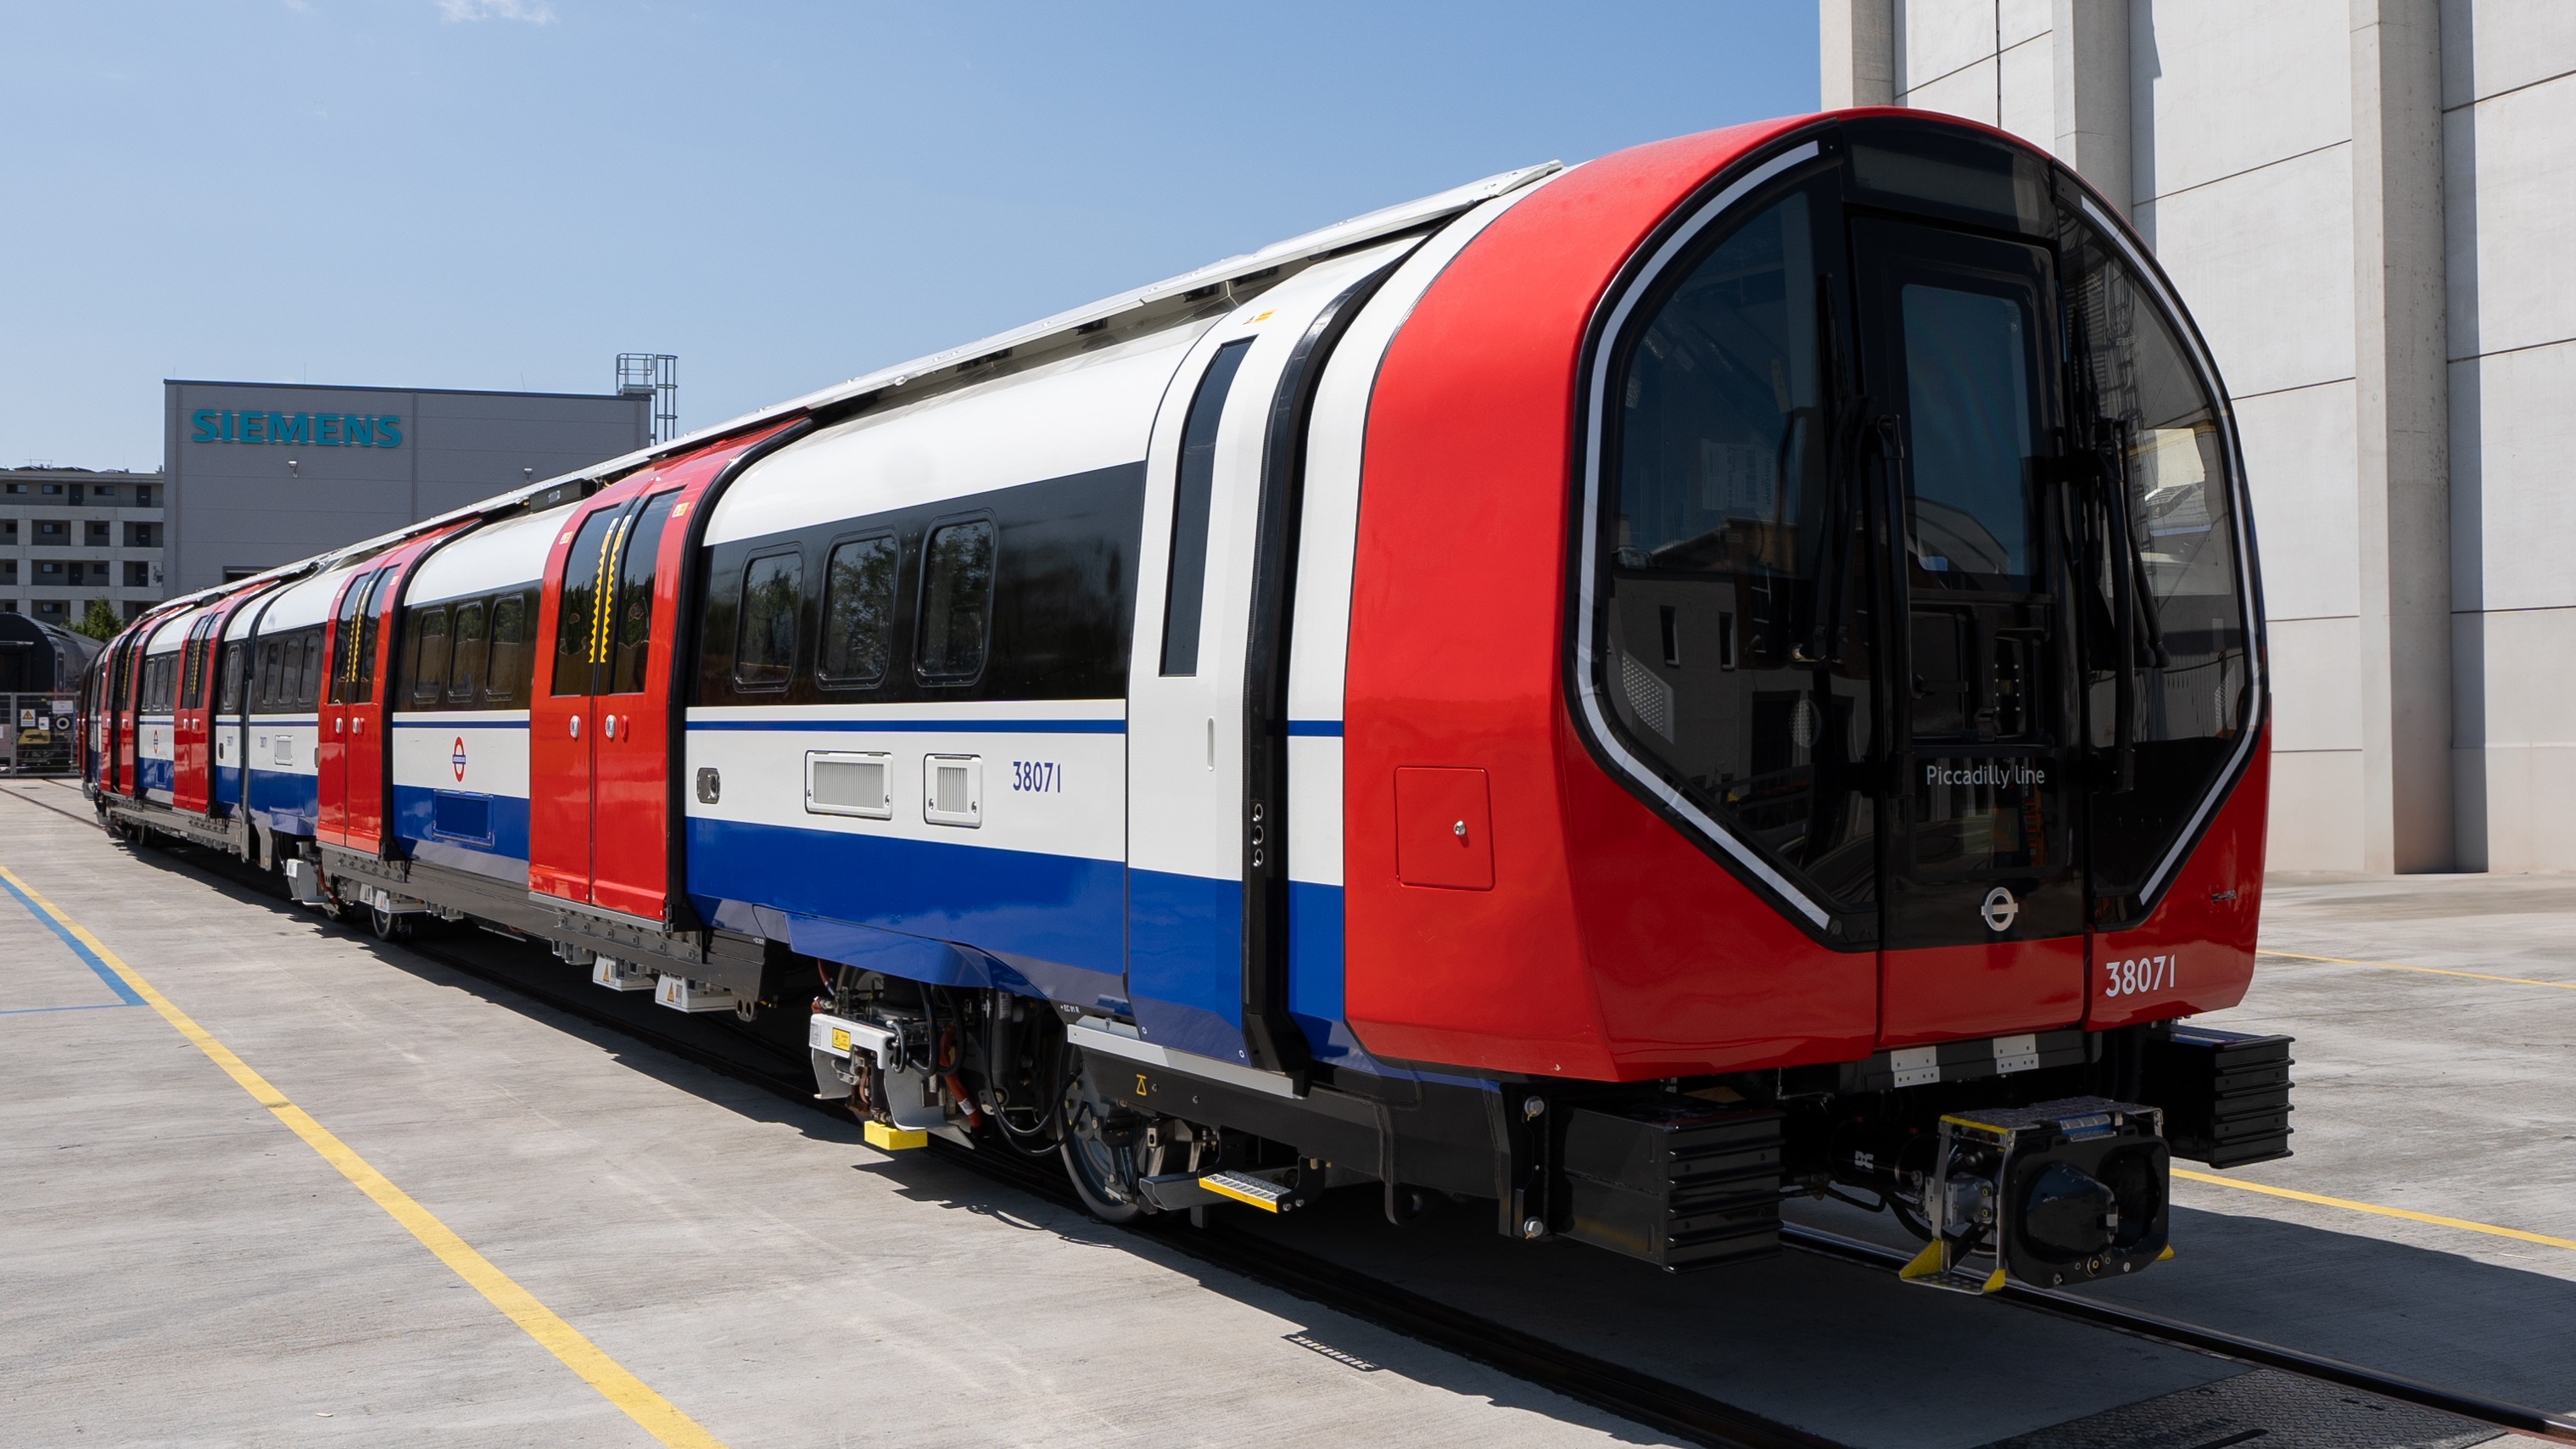 London Underground train capable of running without a driver